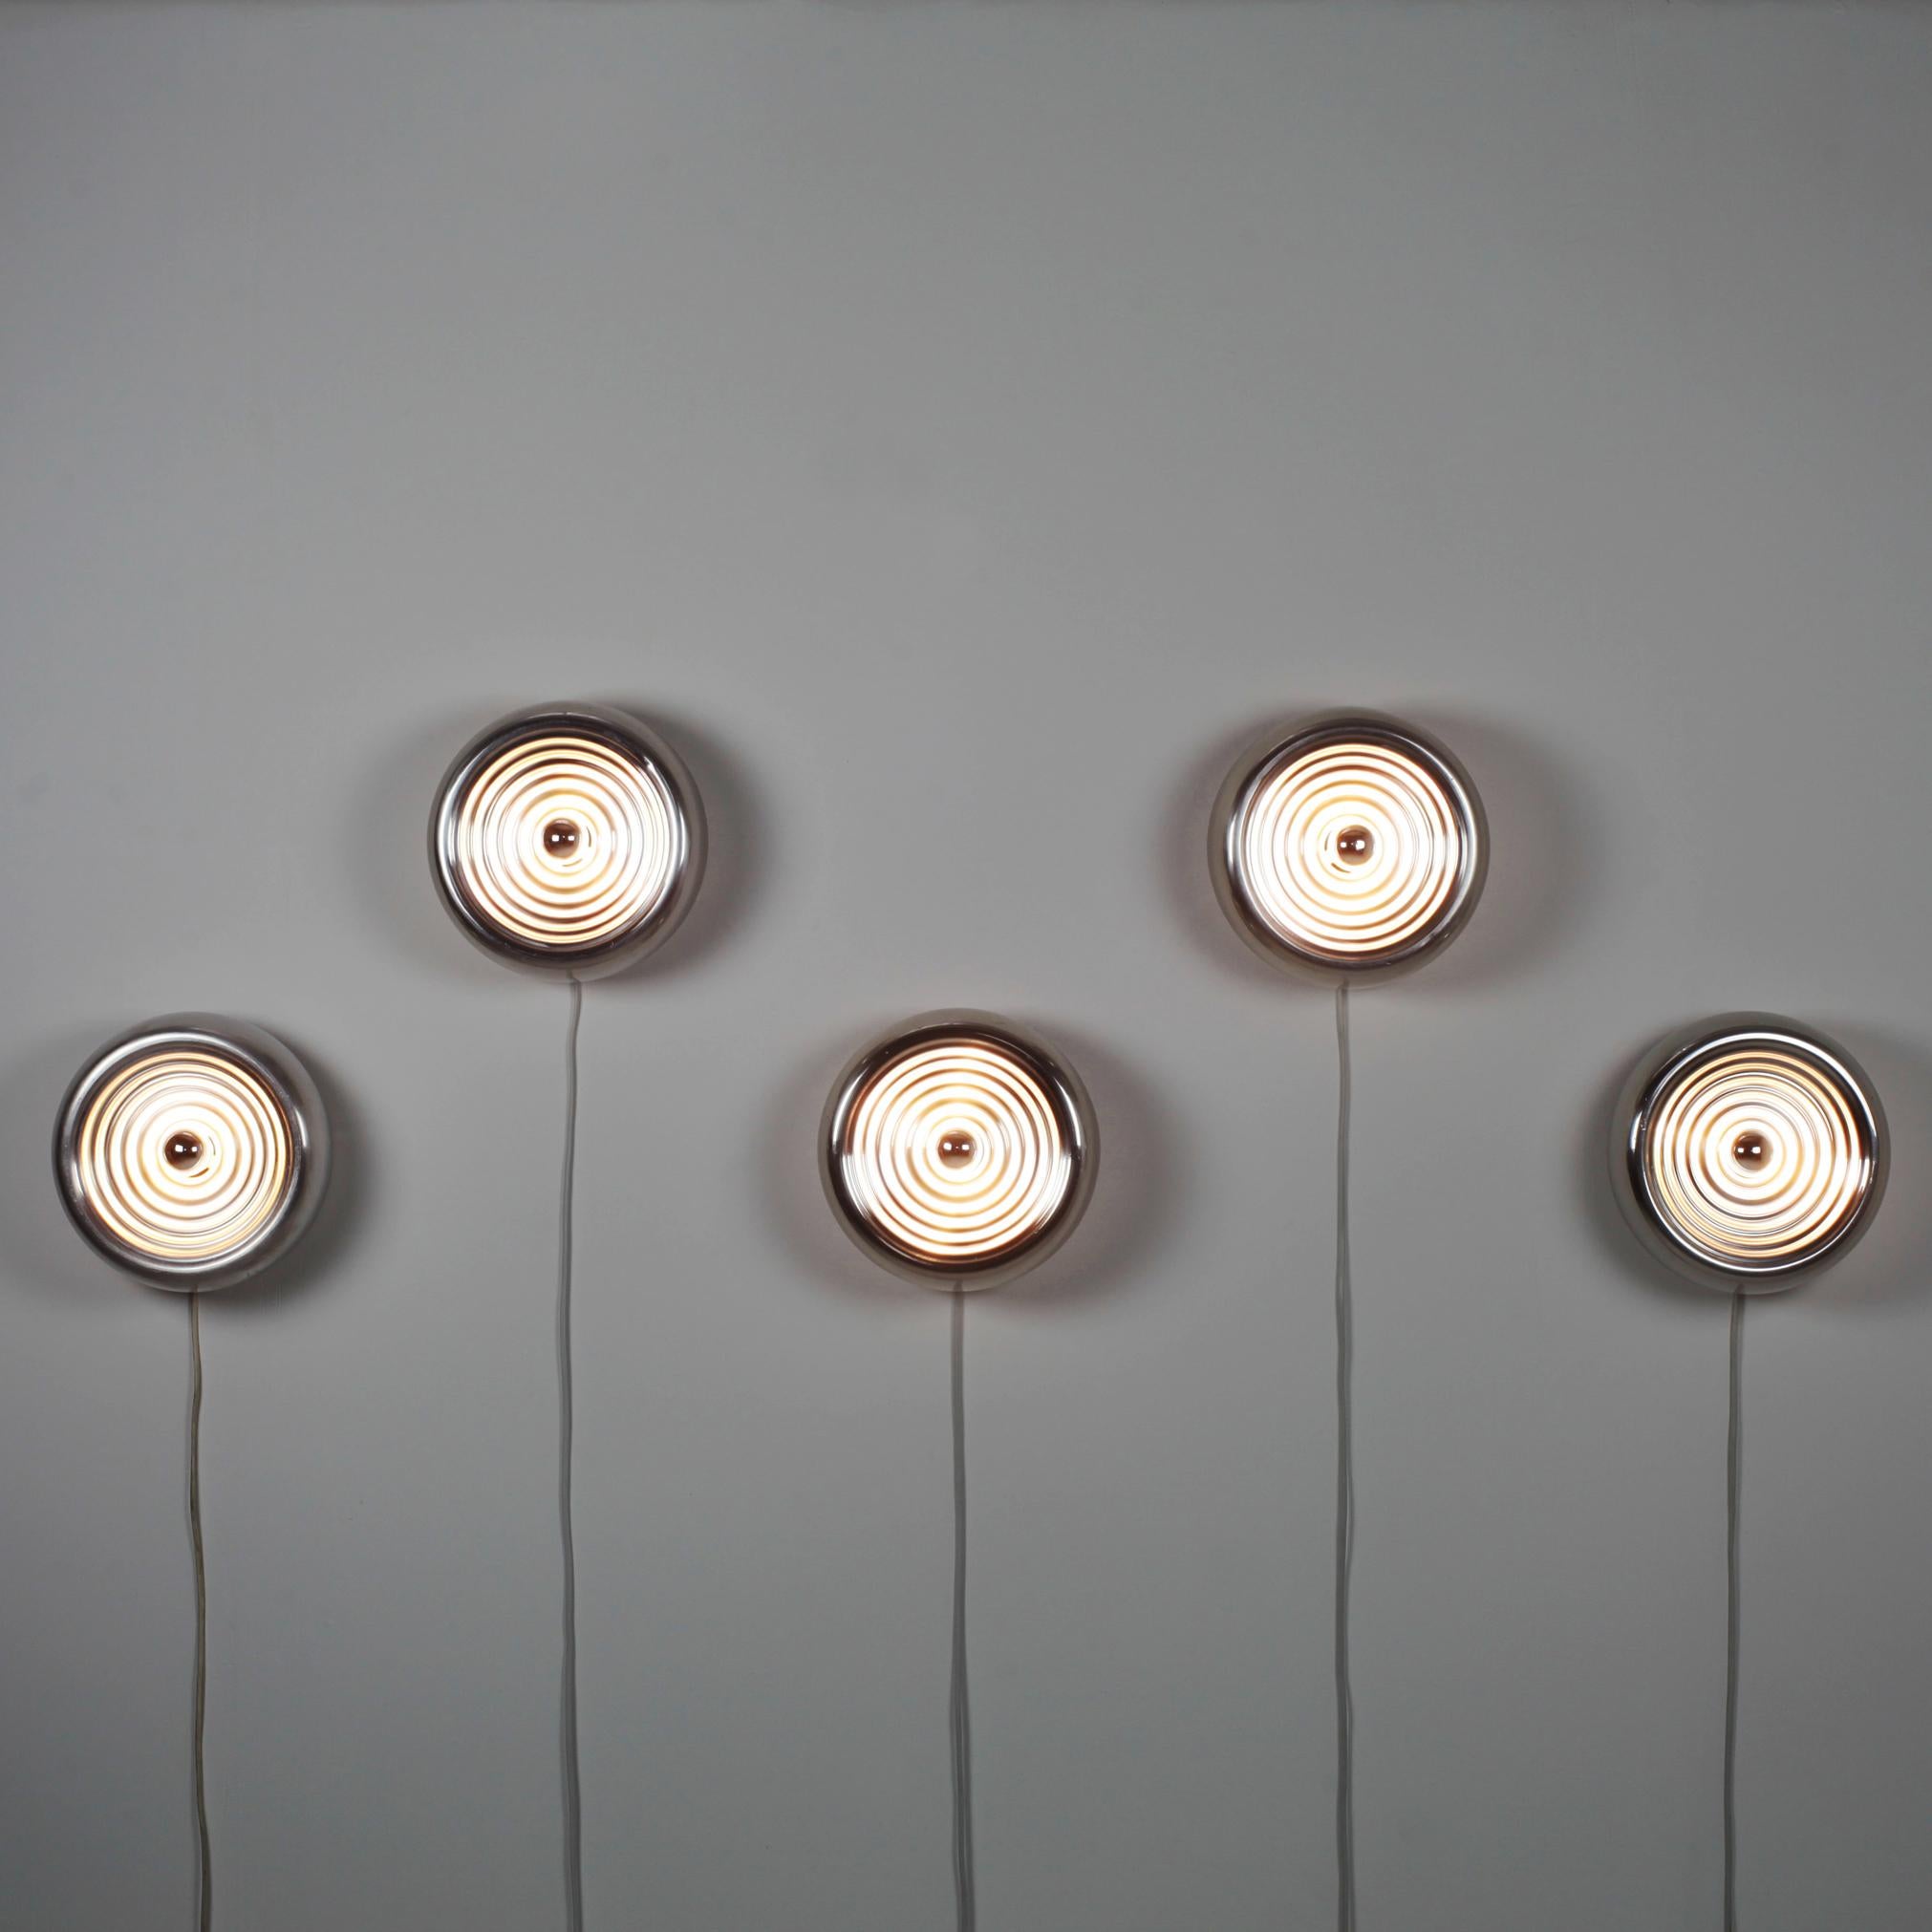 Beautiful set of 5 wall or ceiling lamps by Achille and Pier Giacomo Castiglioni manufactured by Flos in the late 1960s.
Polished corrugated spun aluminum.
No longer manufactured.
Iconic design.

Need E14 bulb.